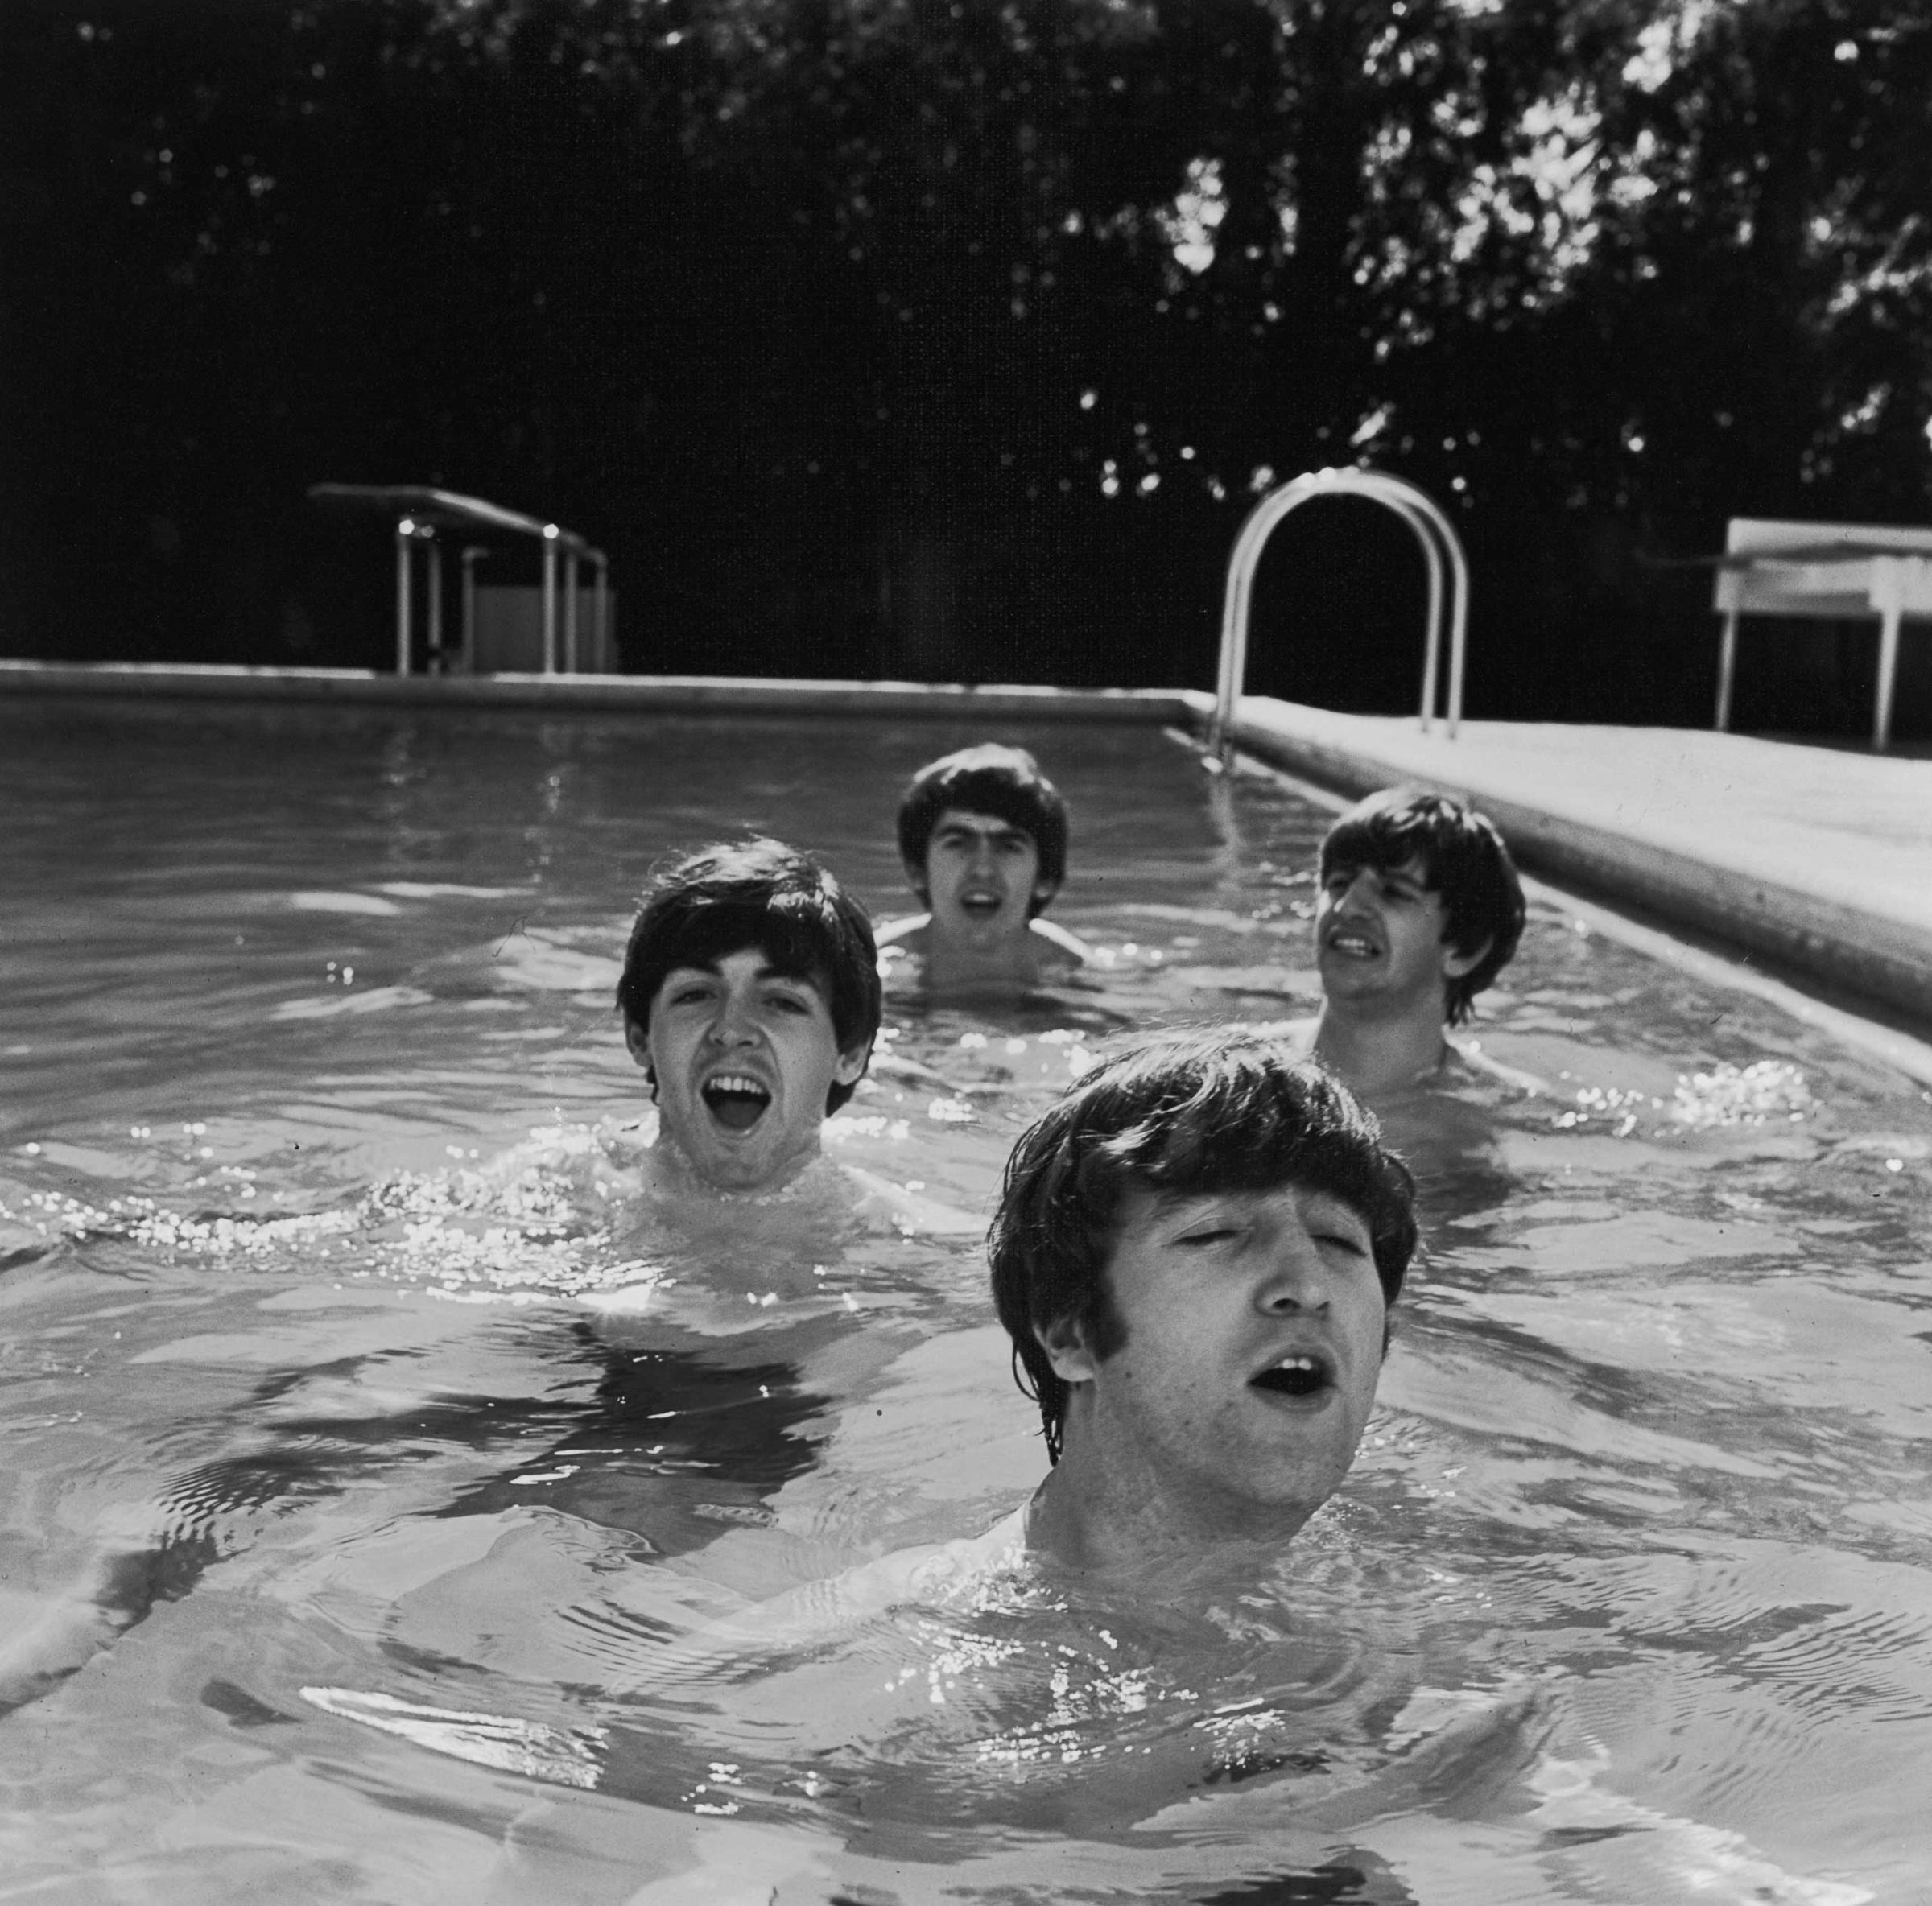 Four lads from Liverpool — Paul McCartney, George Harrison, John Lennon, and Ringo Starr — take a dip in an unheated Miami Beach swimming pool during a cold snap on their first trip to the States. "We could not find a heated pool that could be closed off from the rest of the press," photographer John Loengard later said of this picture, "so we settled for one that was not ... [and they] started turning blue." Originally published in the February 28, 1964, issue of LIFE.